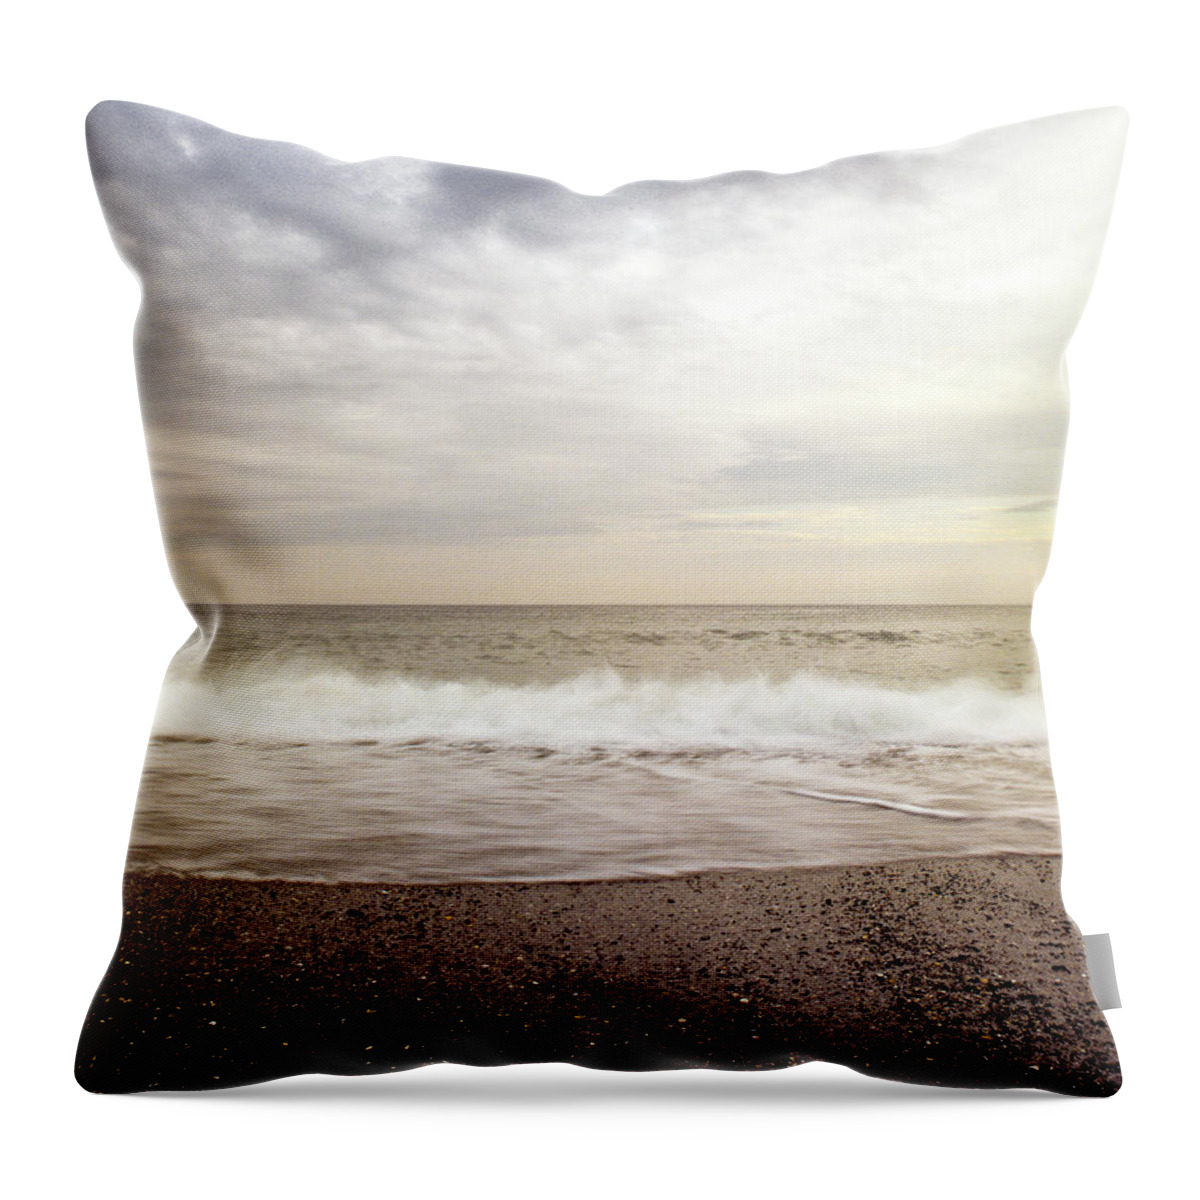 Scenics Throw Pillow featuring the photograph Seasacpe, Cornwall by Paul Cooklin